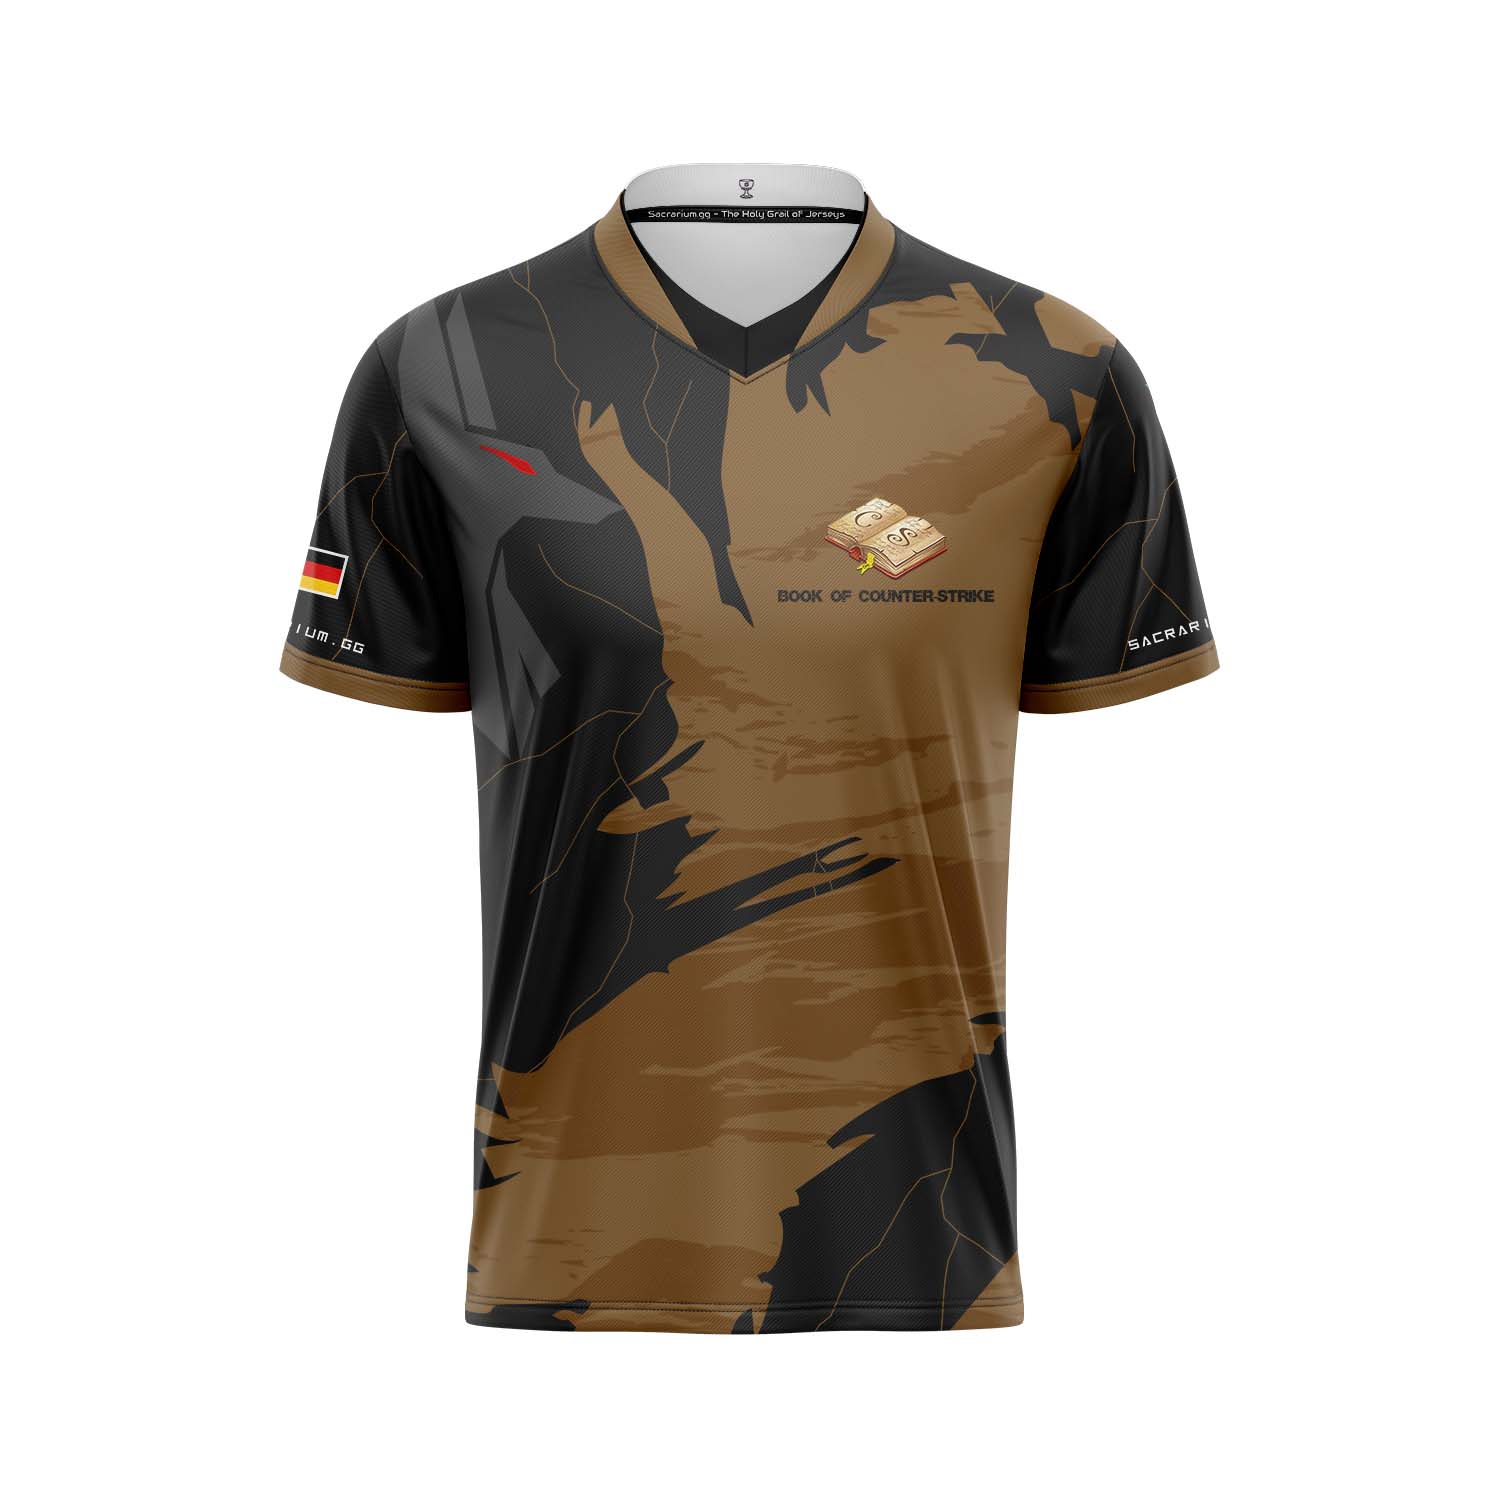 Book of Counter-Strike Jersey